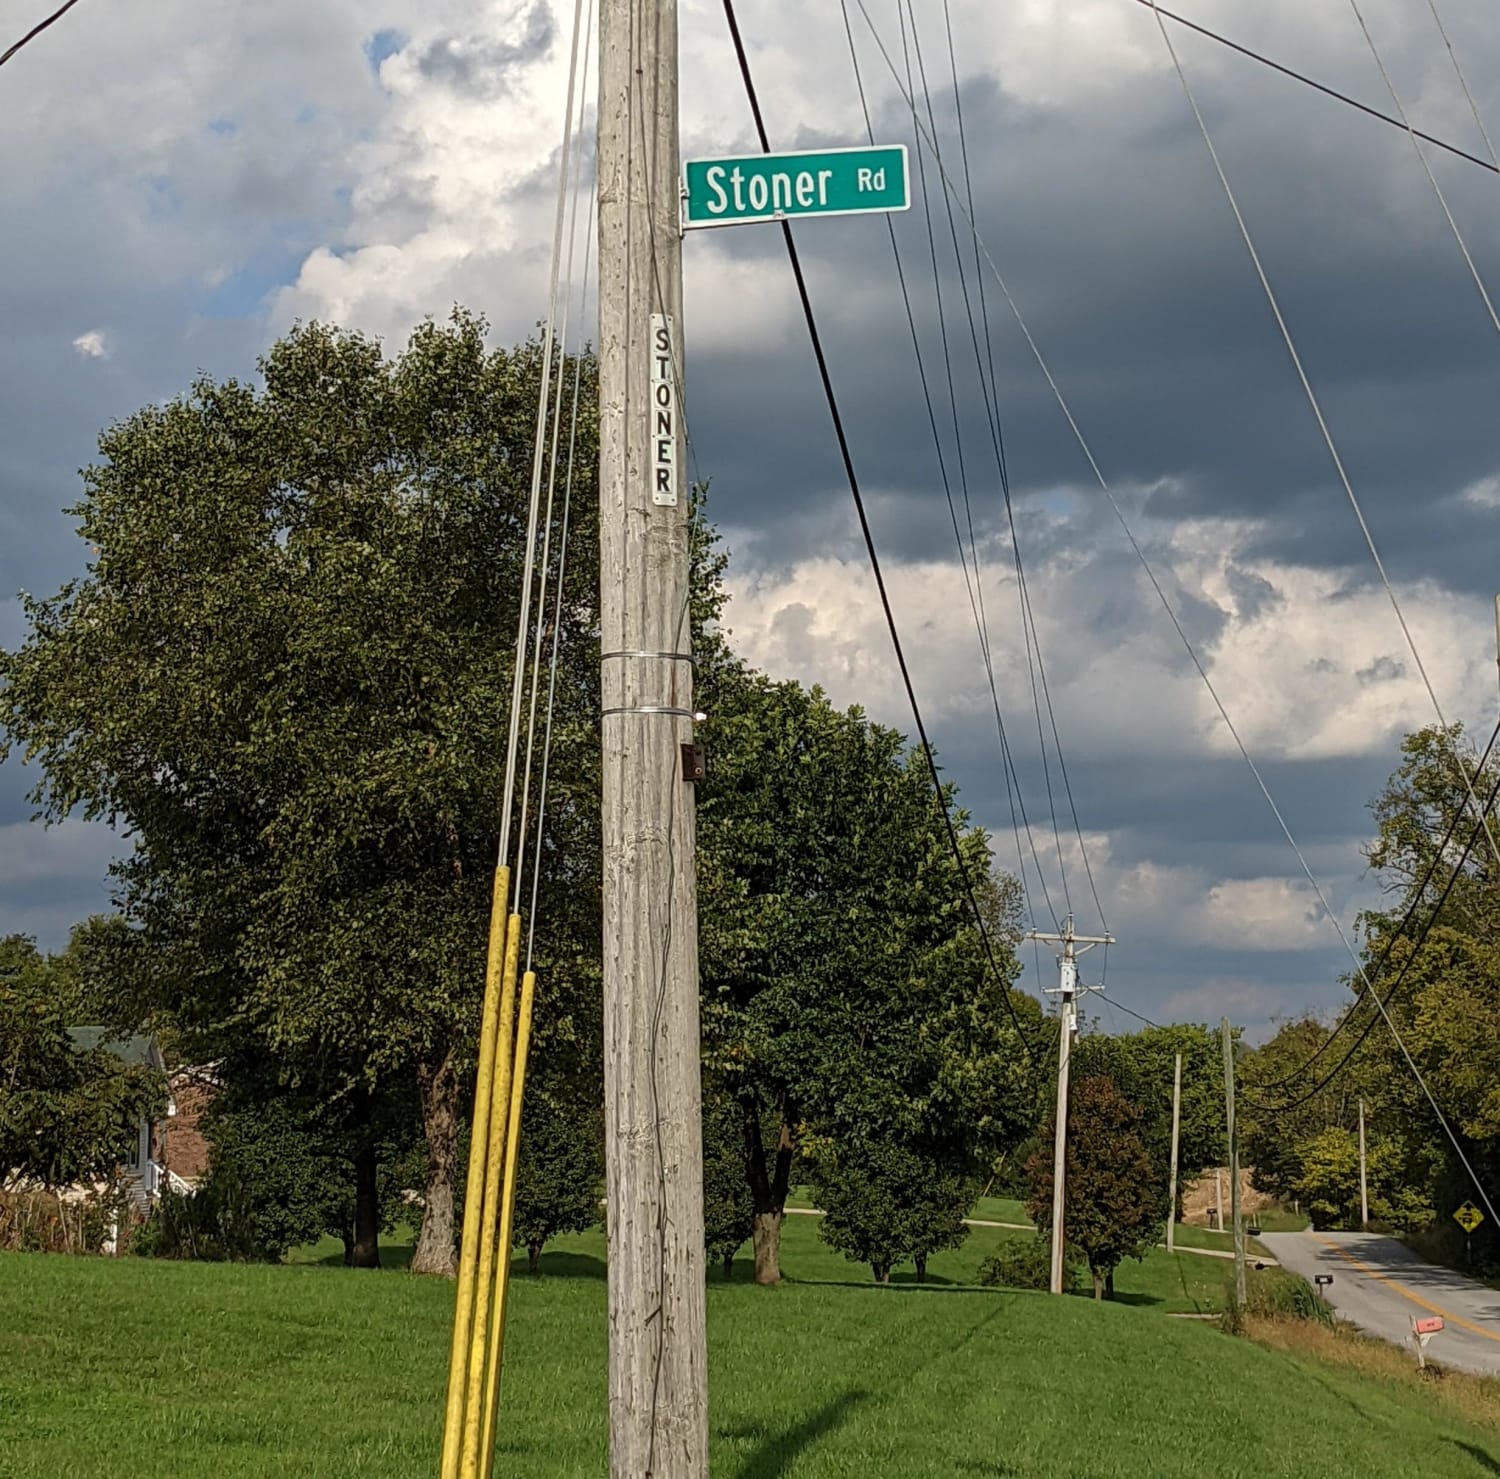 This street sign has been stolen a countless number of times. It keeps getting higher, literally.